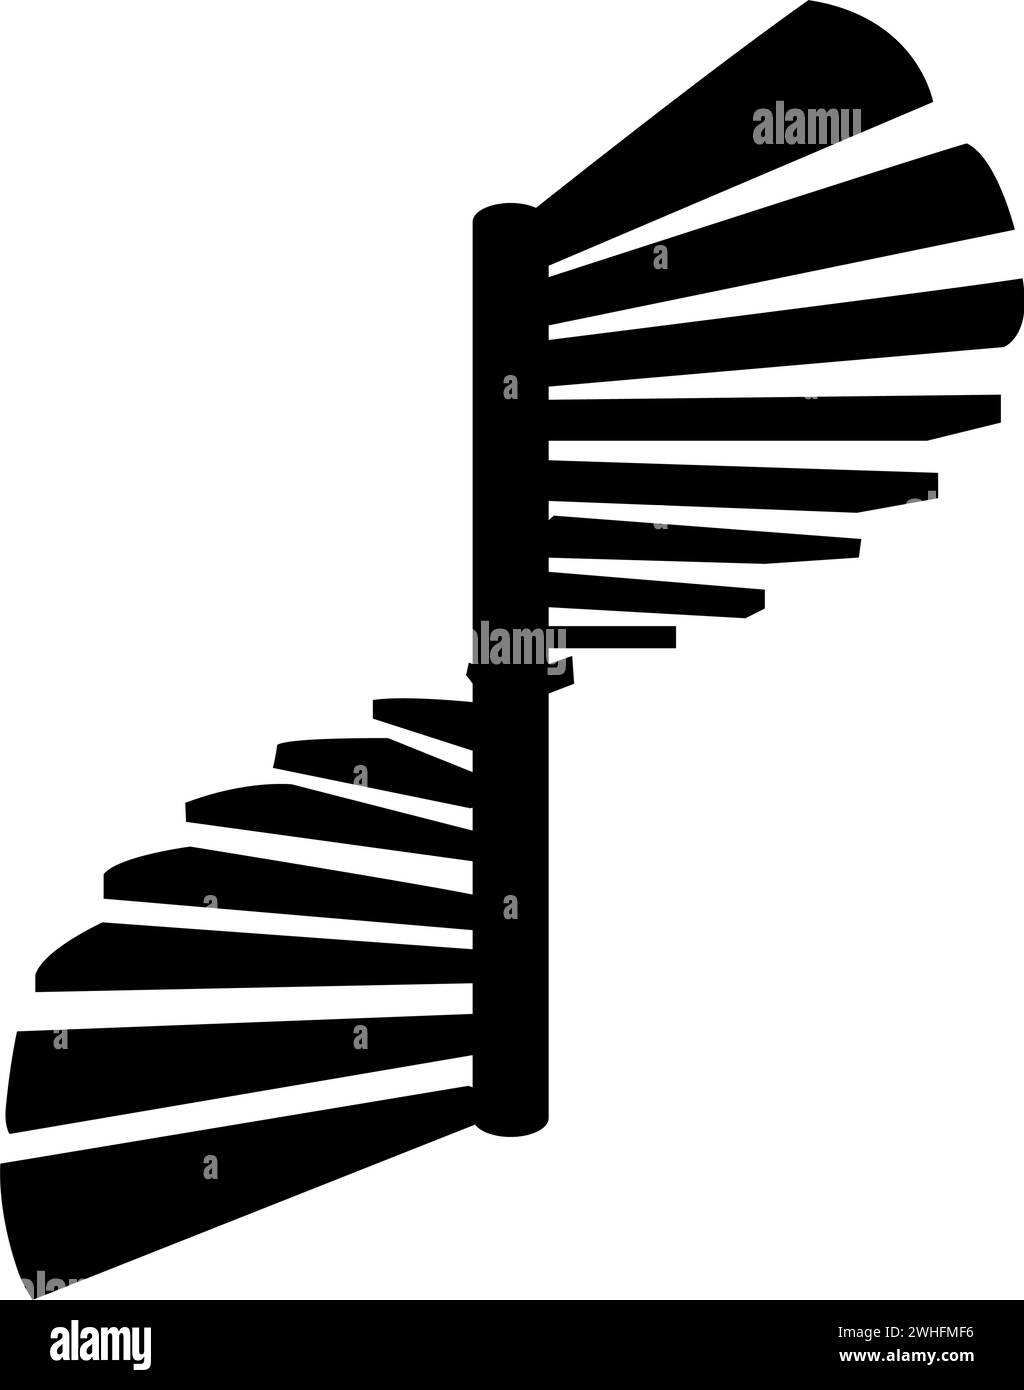 Spiral staircase circular stairs icon black color vector illustration image flat style simple Stock Vector